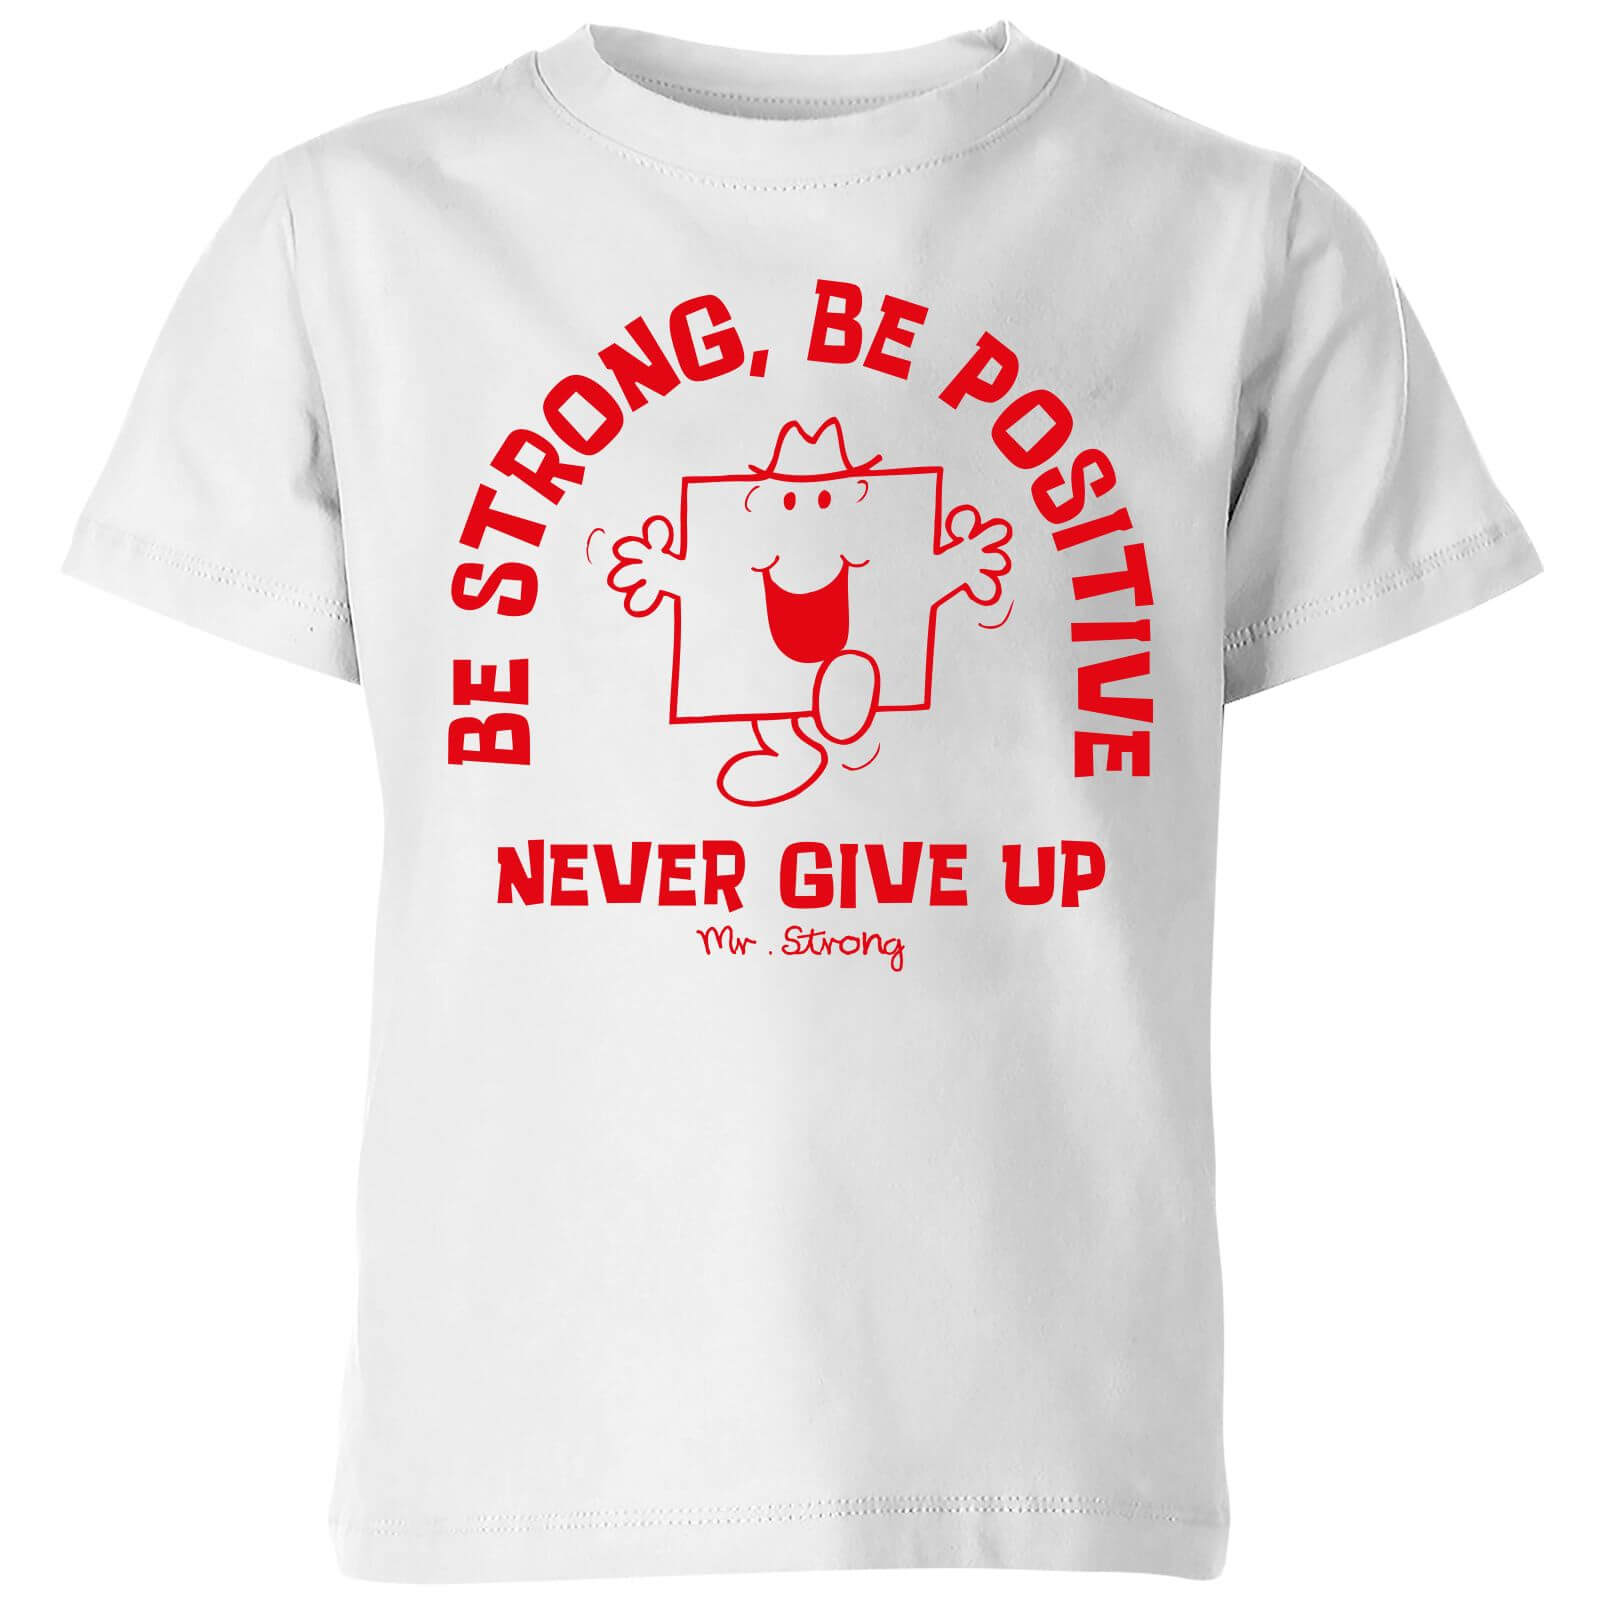 Mr Men & Little Miss Be Strong, Be Positive, Never Give Up Kids' T-Shirt - White - 3-4 Years - White